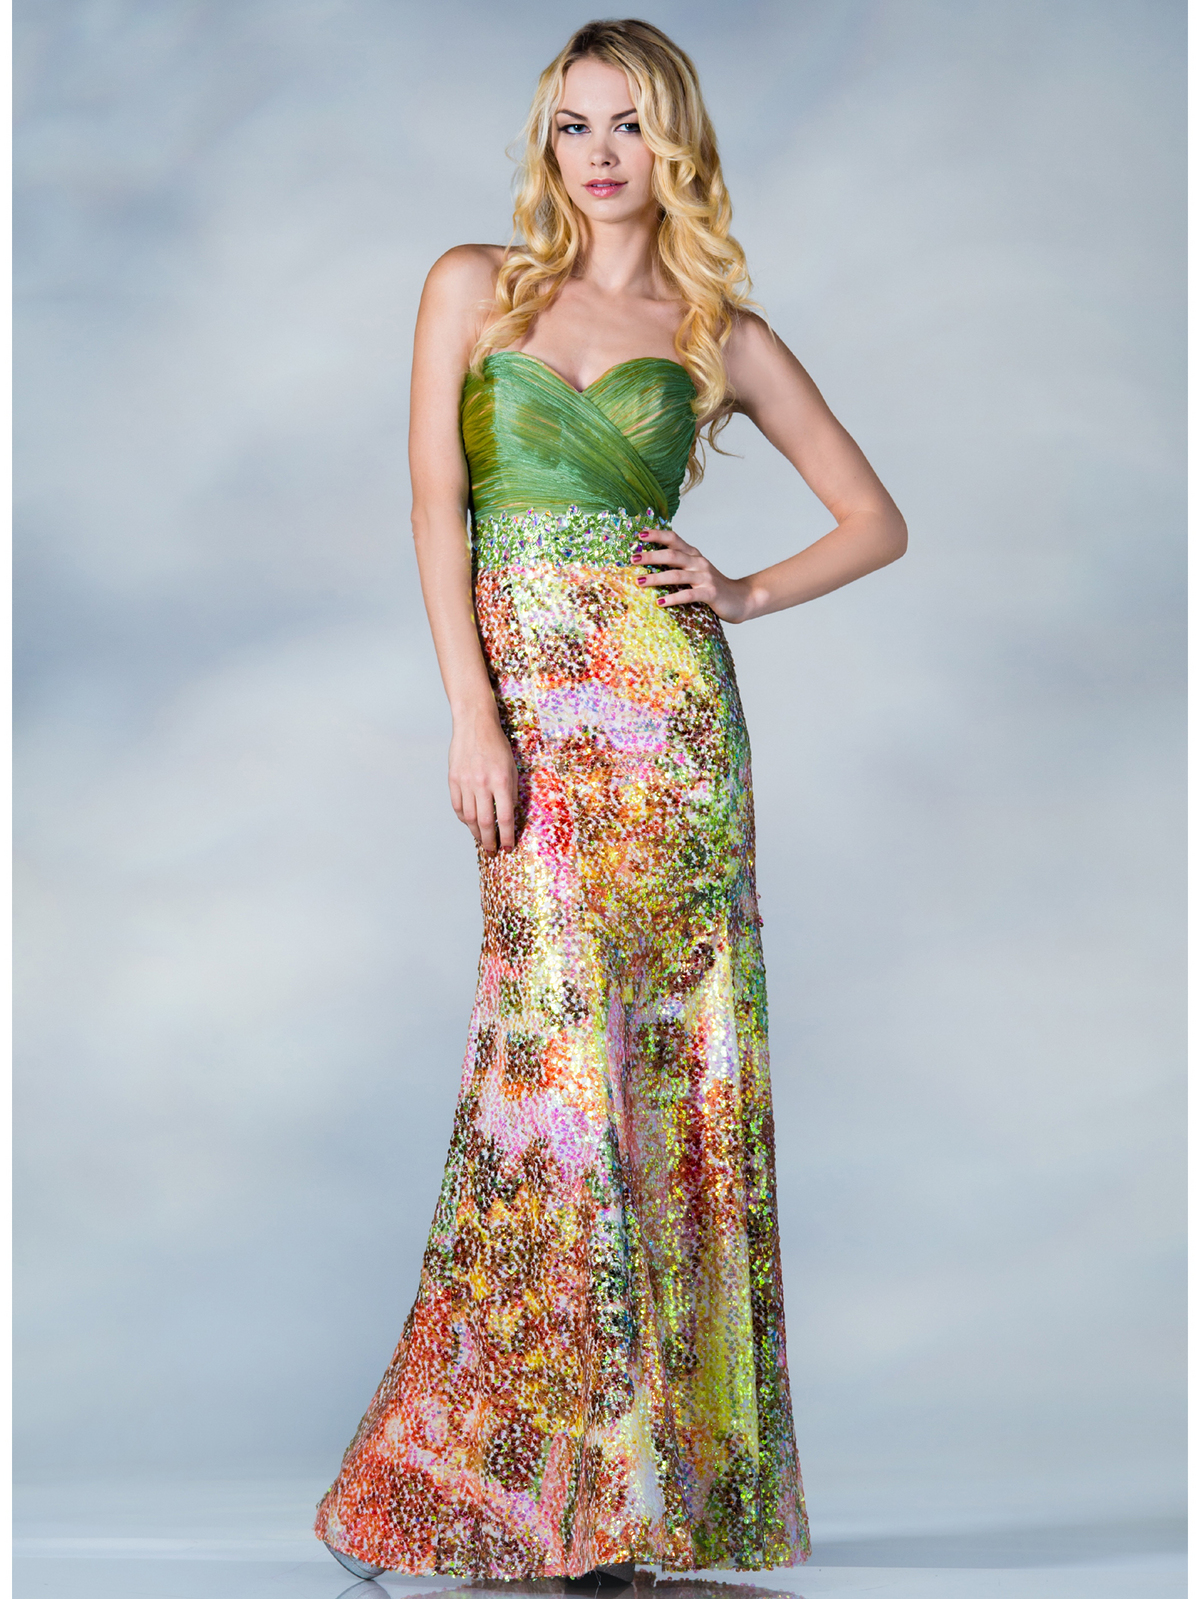 Formal Dresses - Page 26 of 522 - Prom Dress Shops